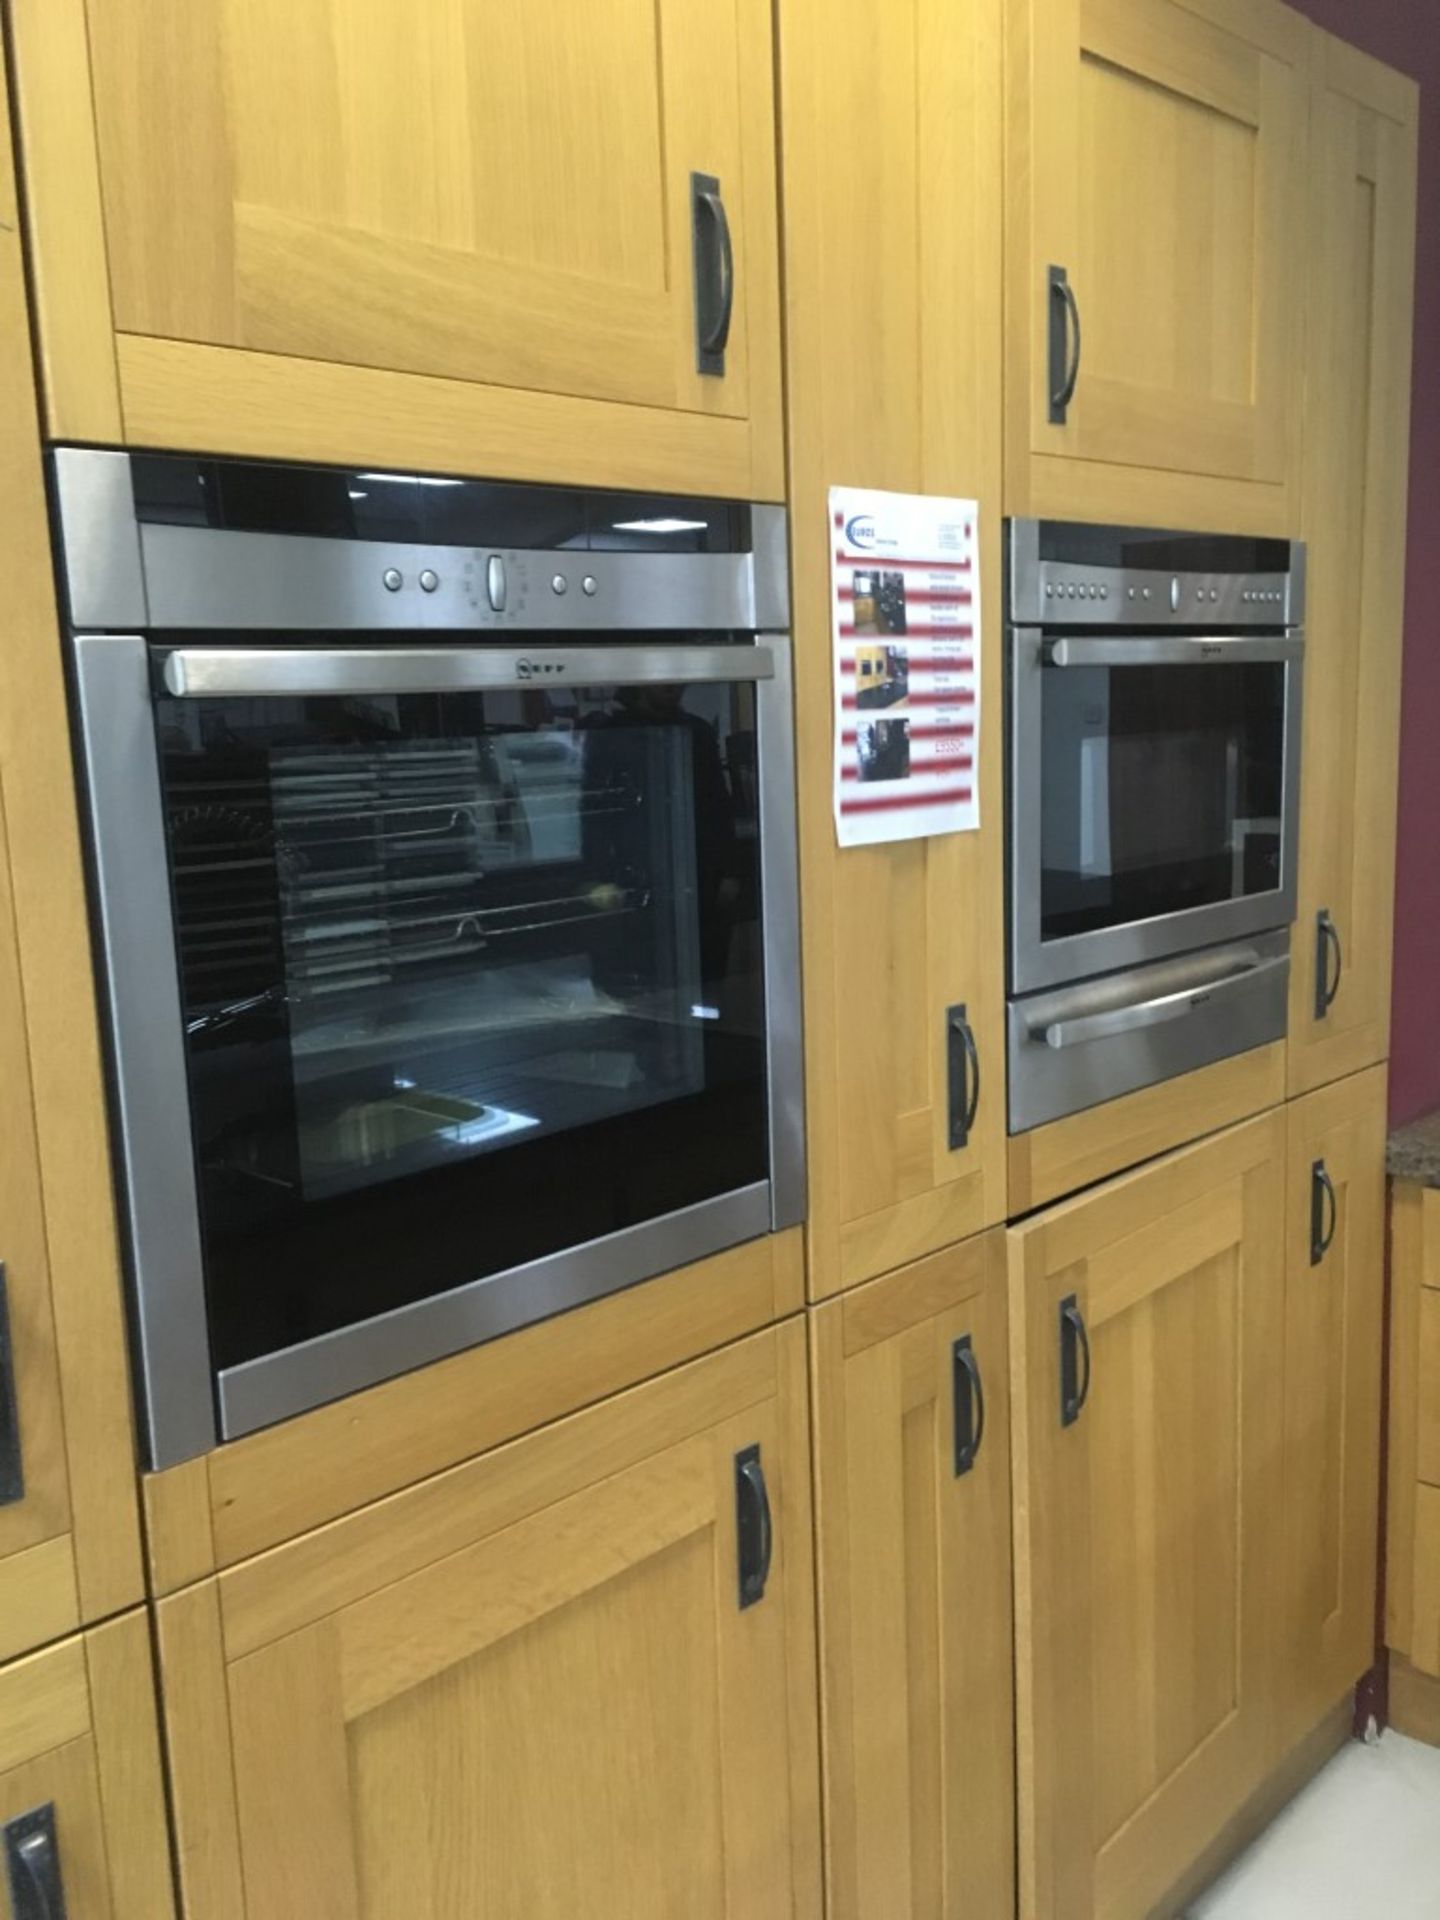 Natural Solid Wood Kitchen Units with Granite Worktops & Appliances - Image 4 of 7